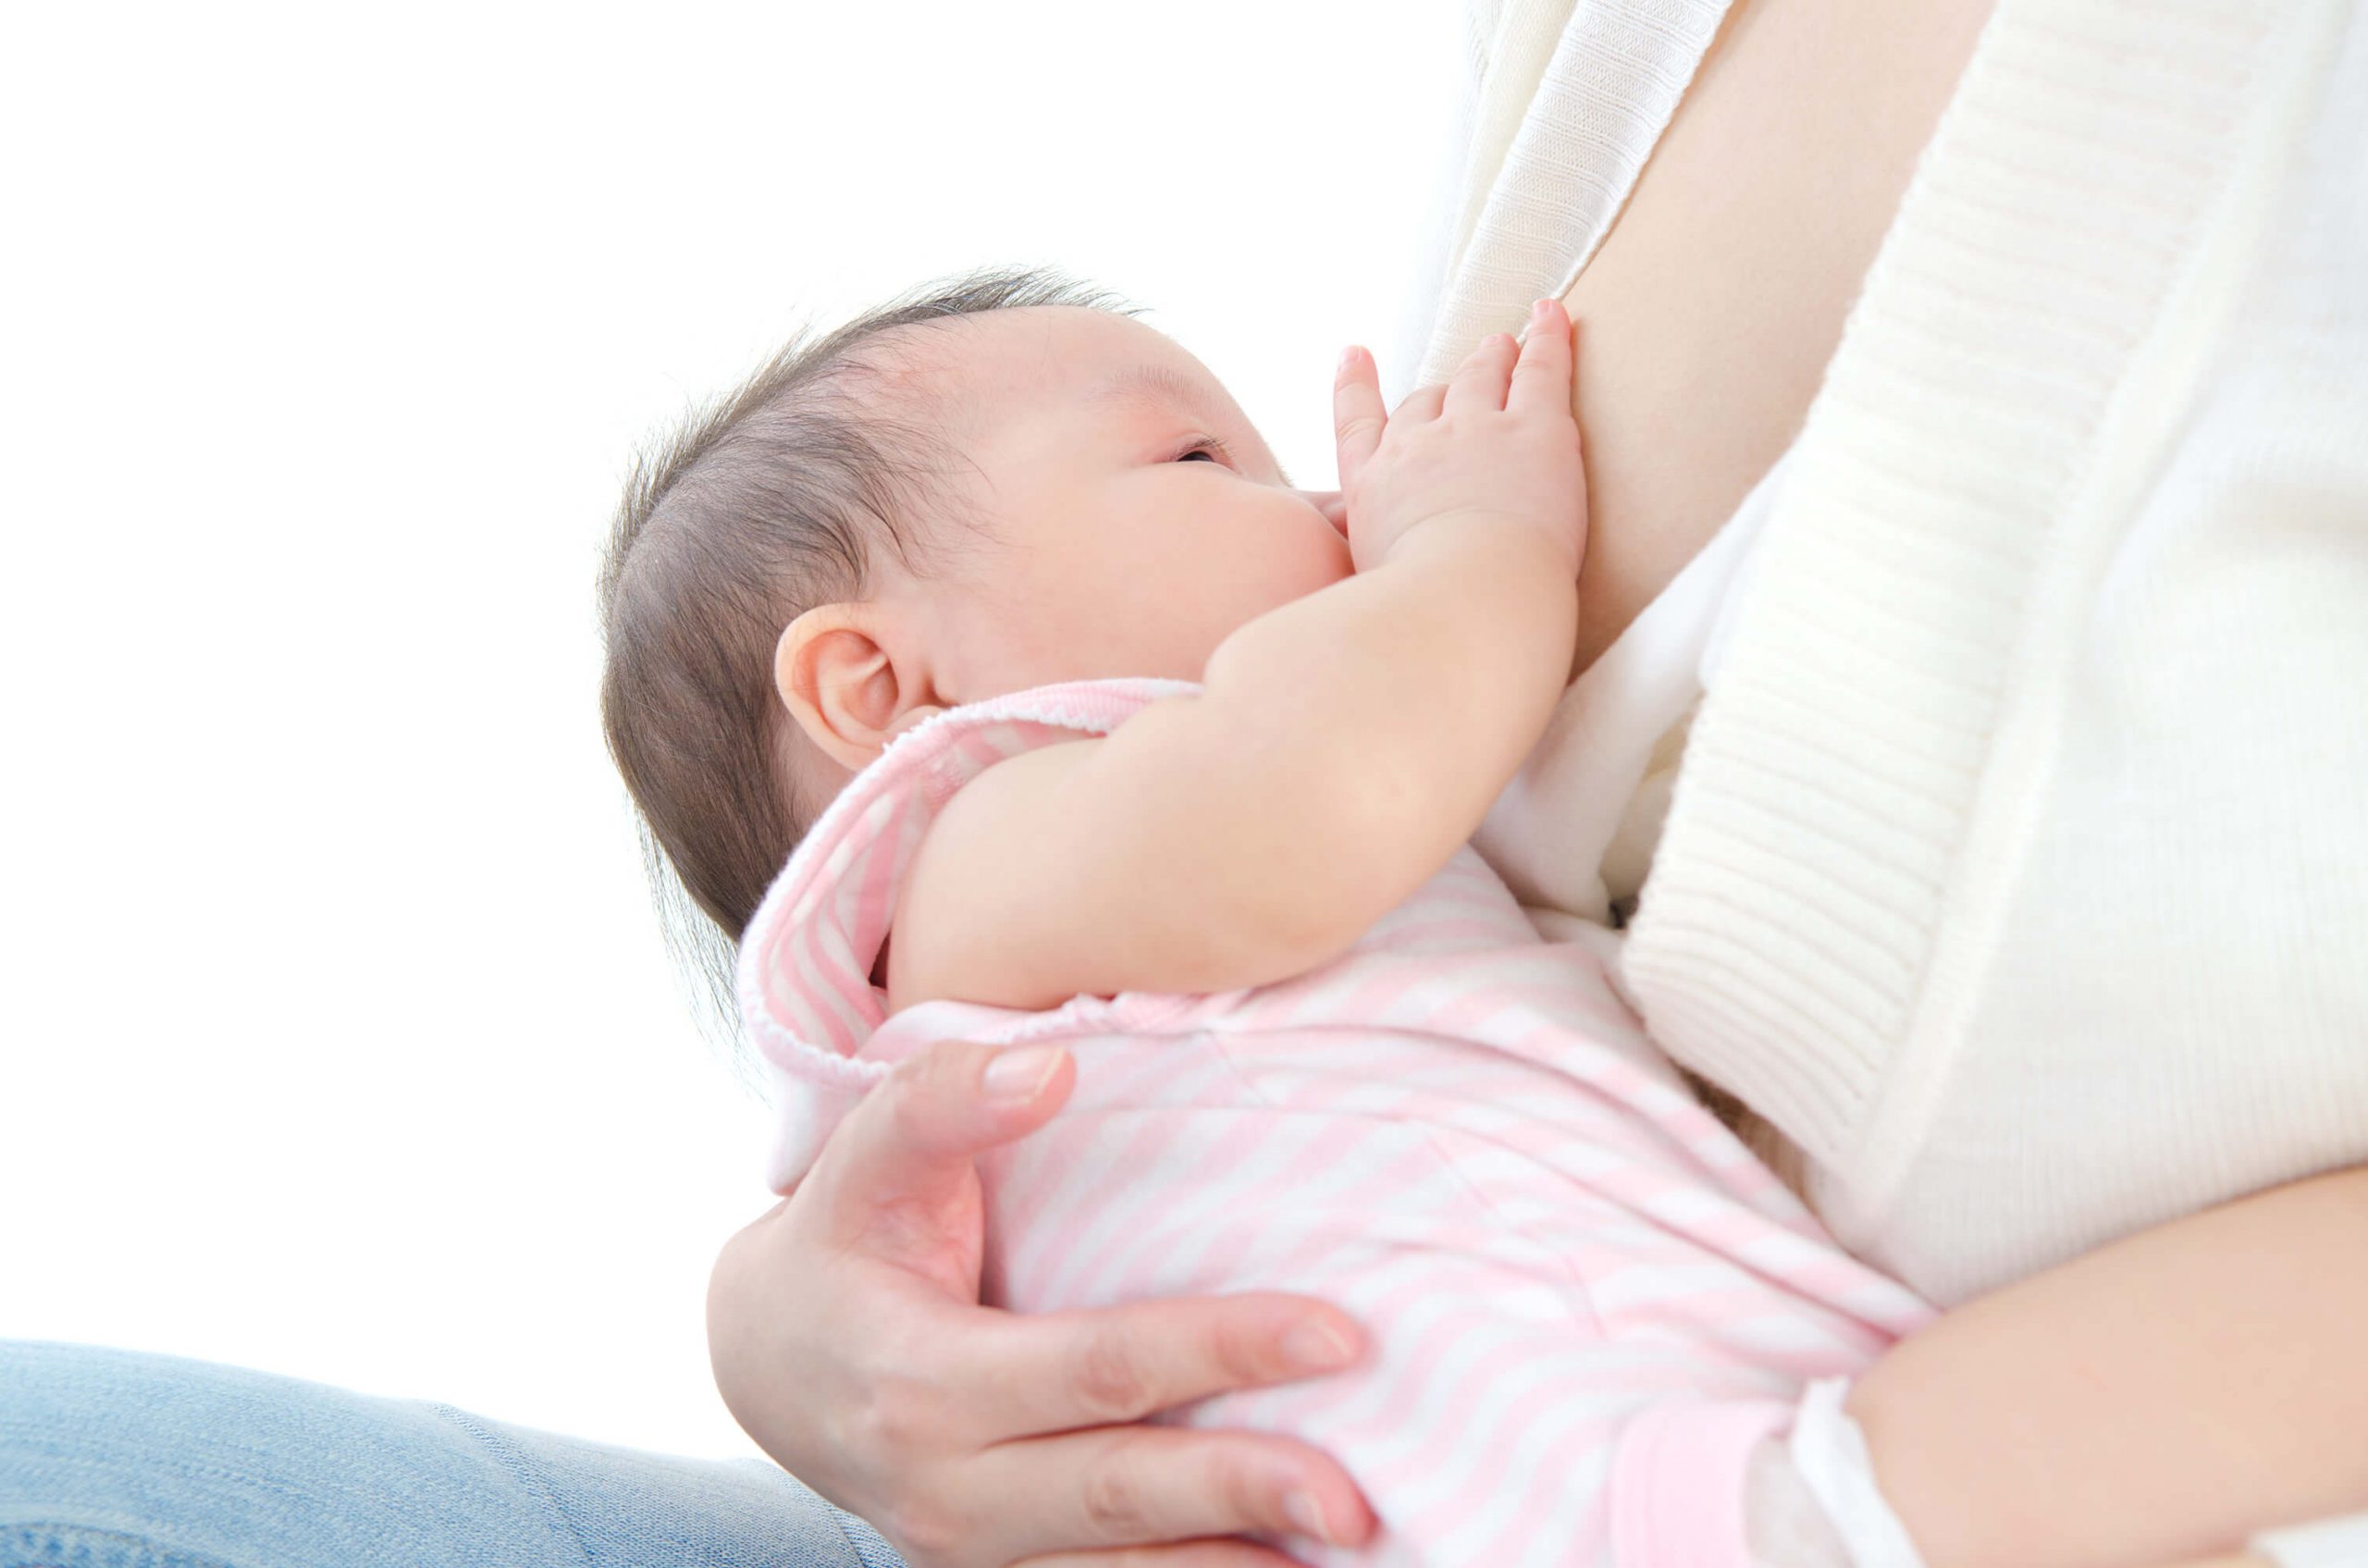 10 Benefits of Breast Pads for Comfortable Breastfeeding